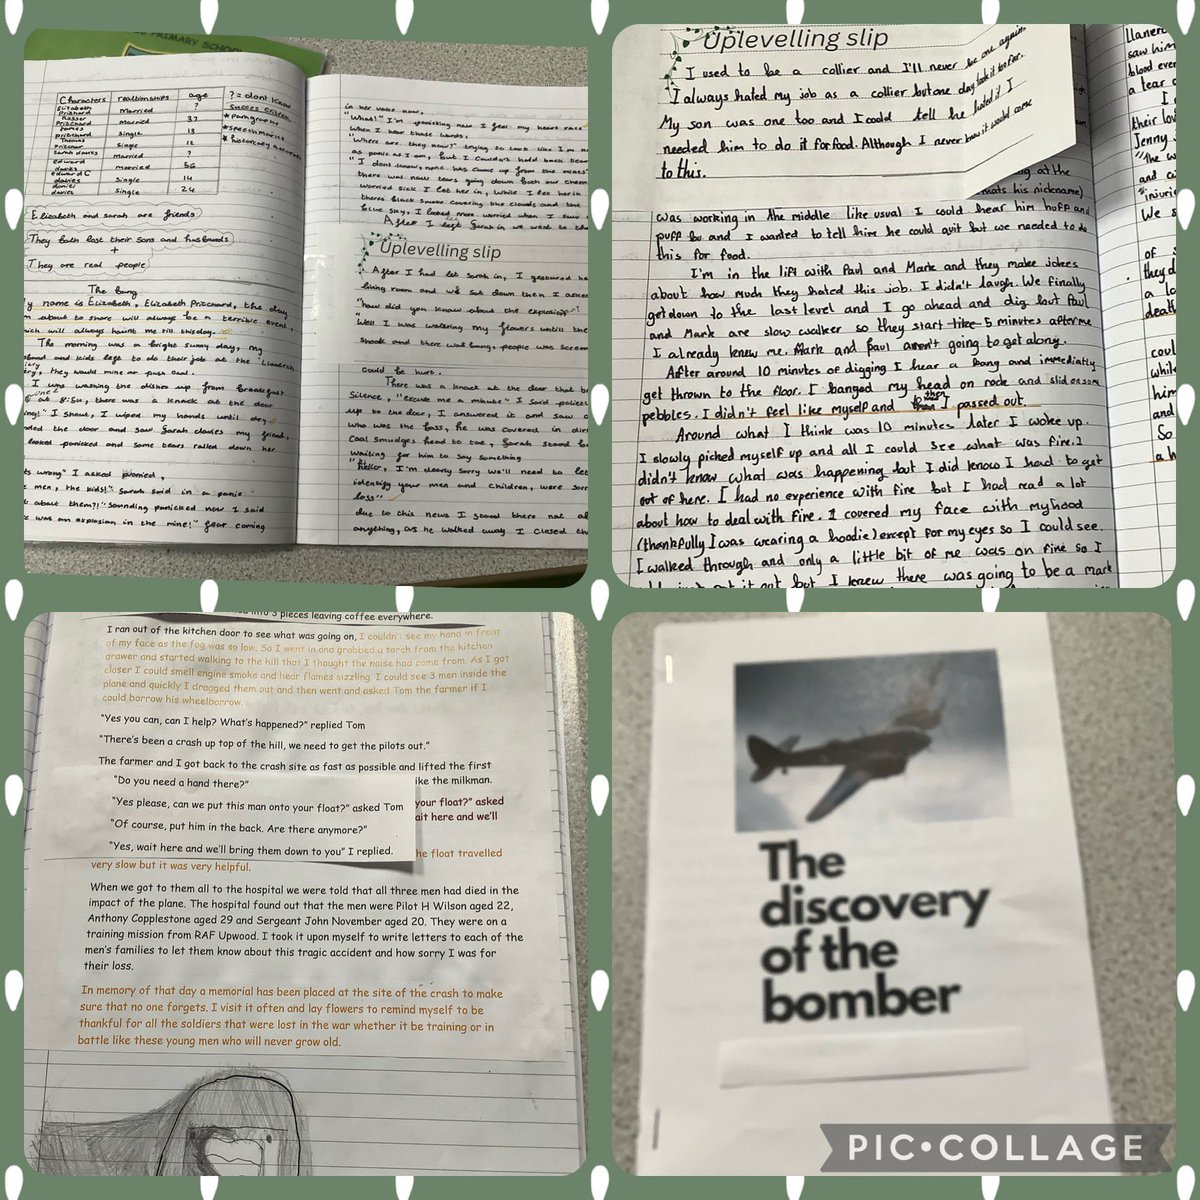 Look at these fantastic historical narratives that we have written today. These are about local history events that we have researched. We have uplevelled them ready to publish. @MrsHLeeY56 @garntegprimary